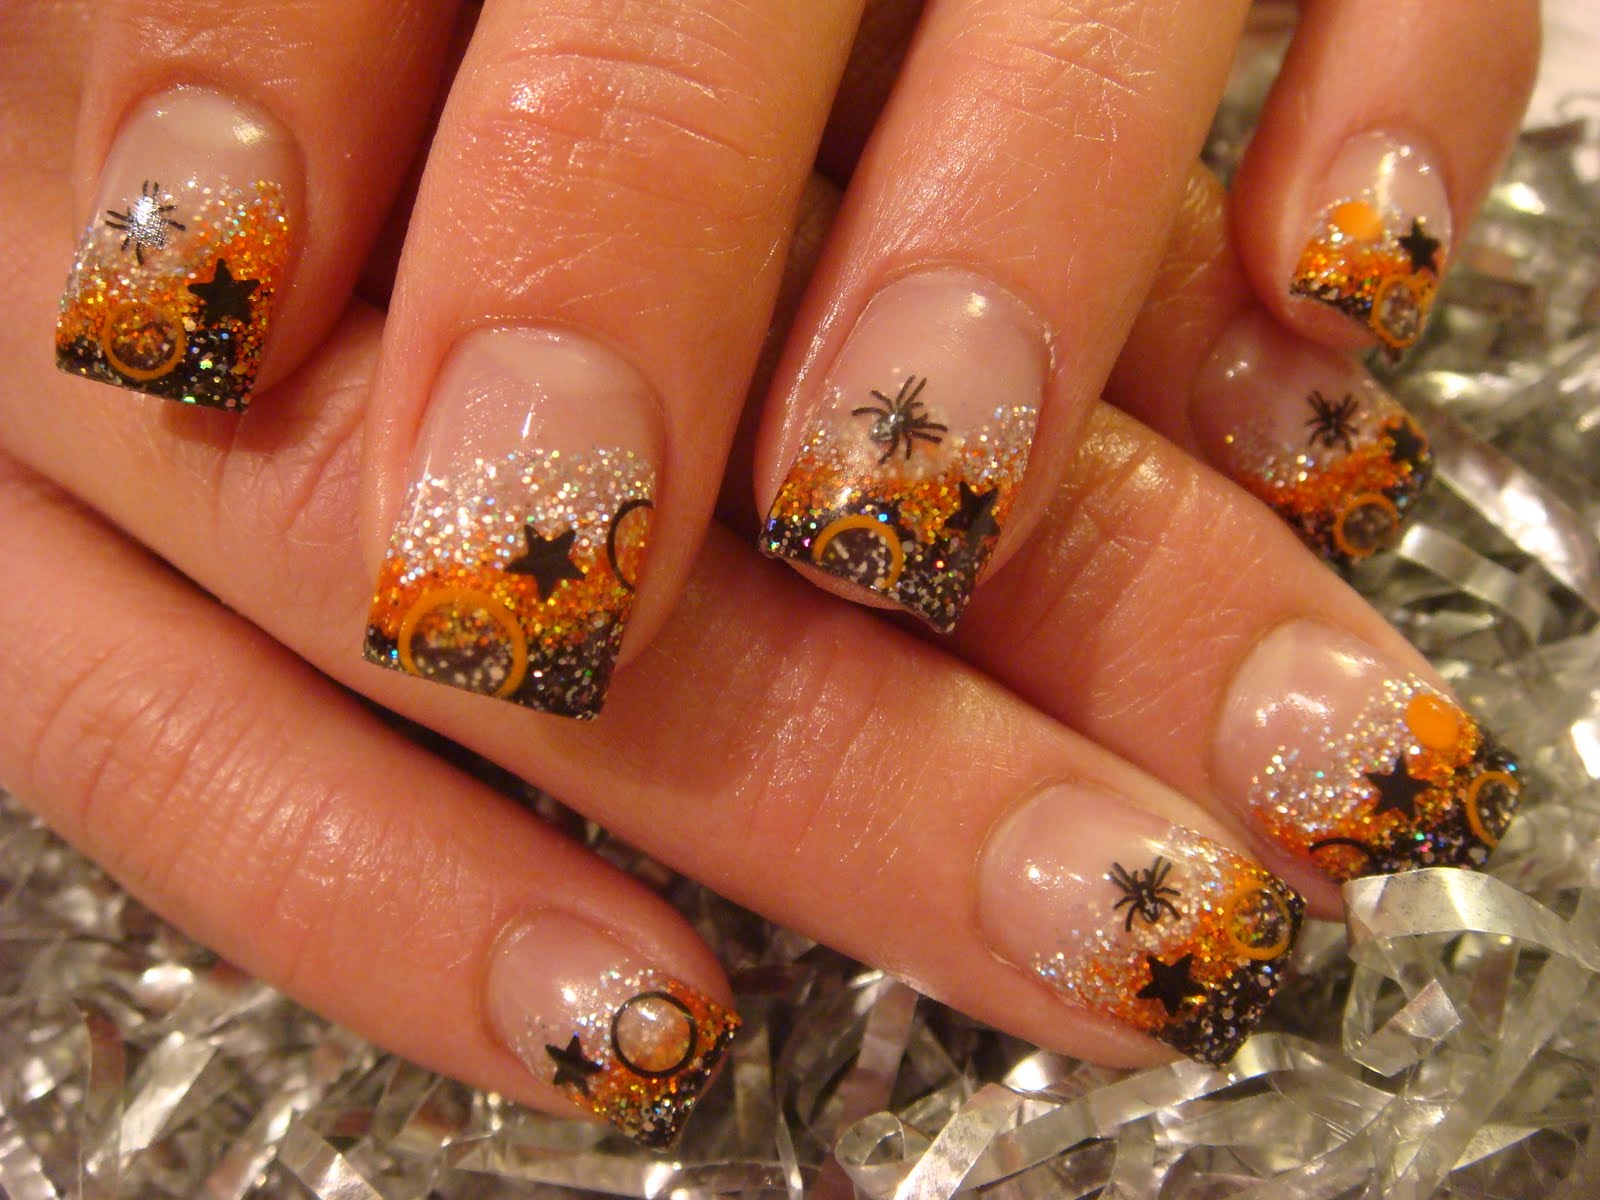 October Nail Designs with Christian Symbols - wide 2